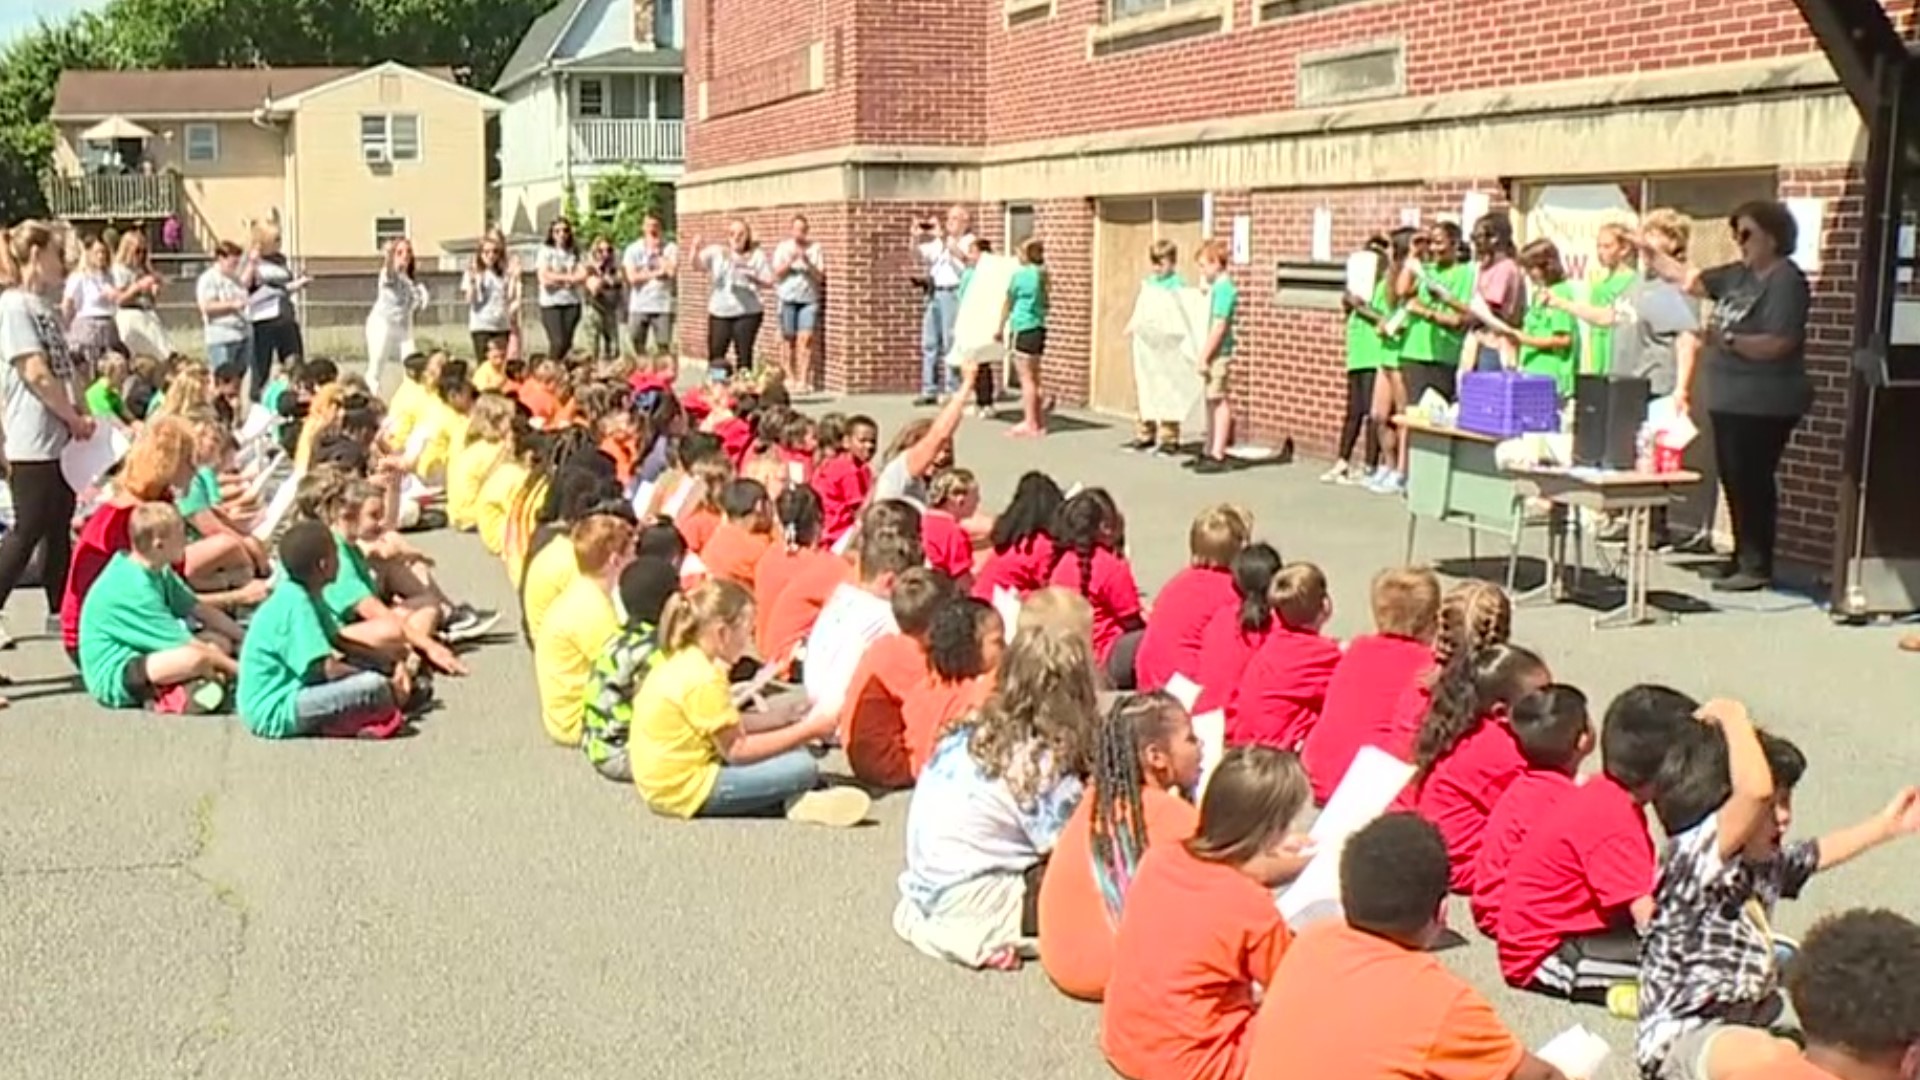 Students and teachers shared a bittersweet farewell to a neighborhood school in Luzerne County.